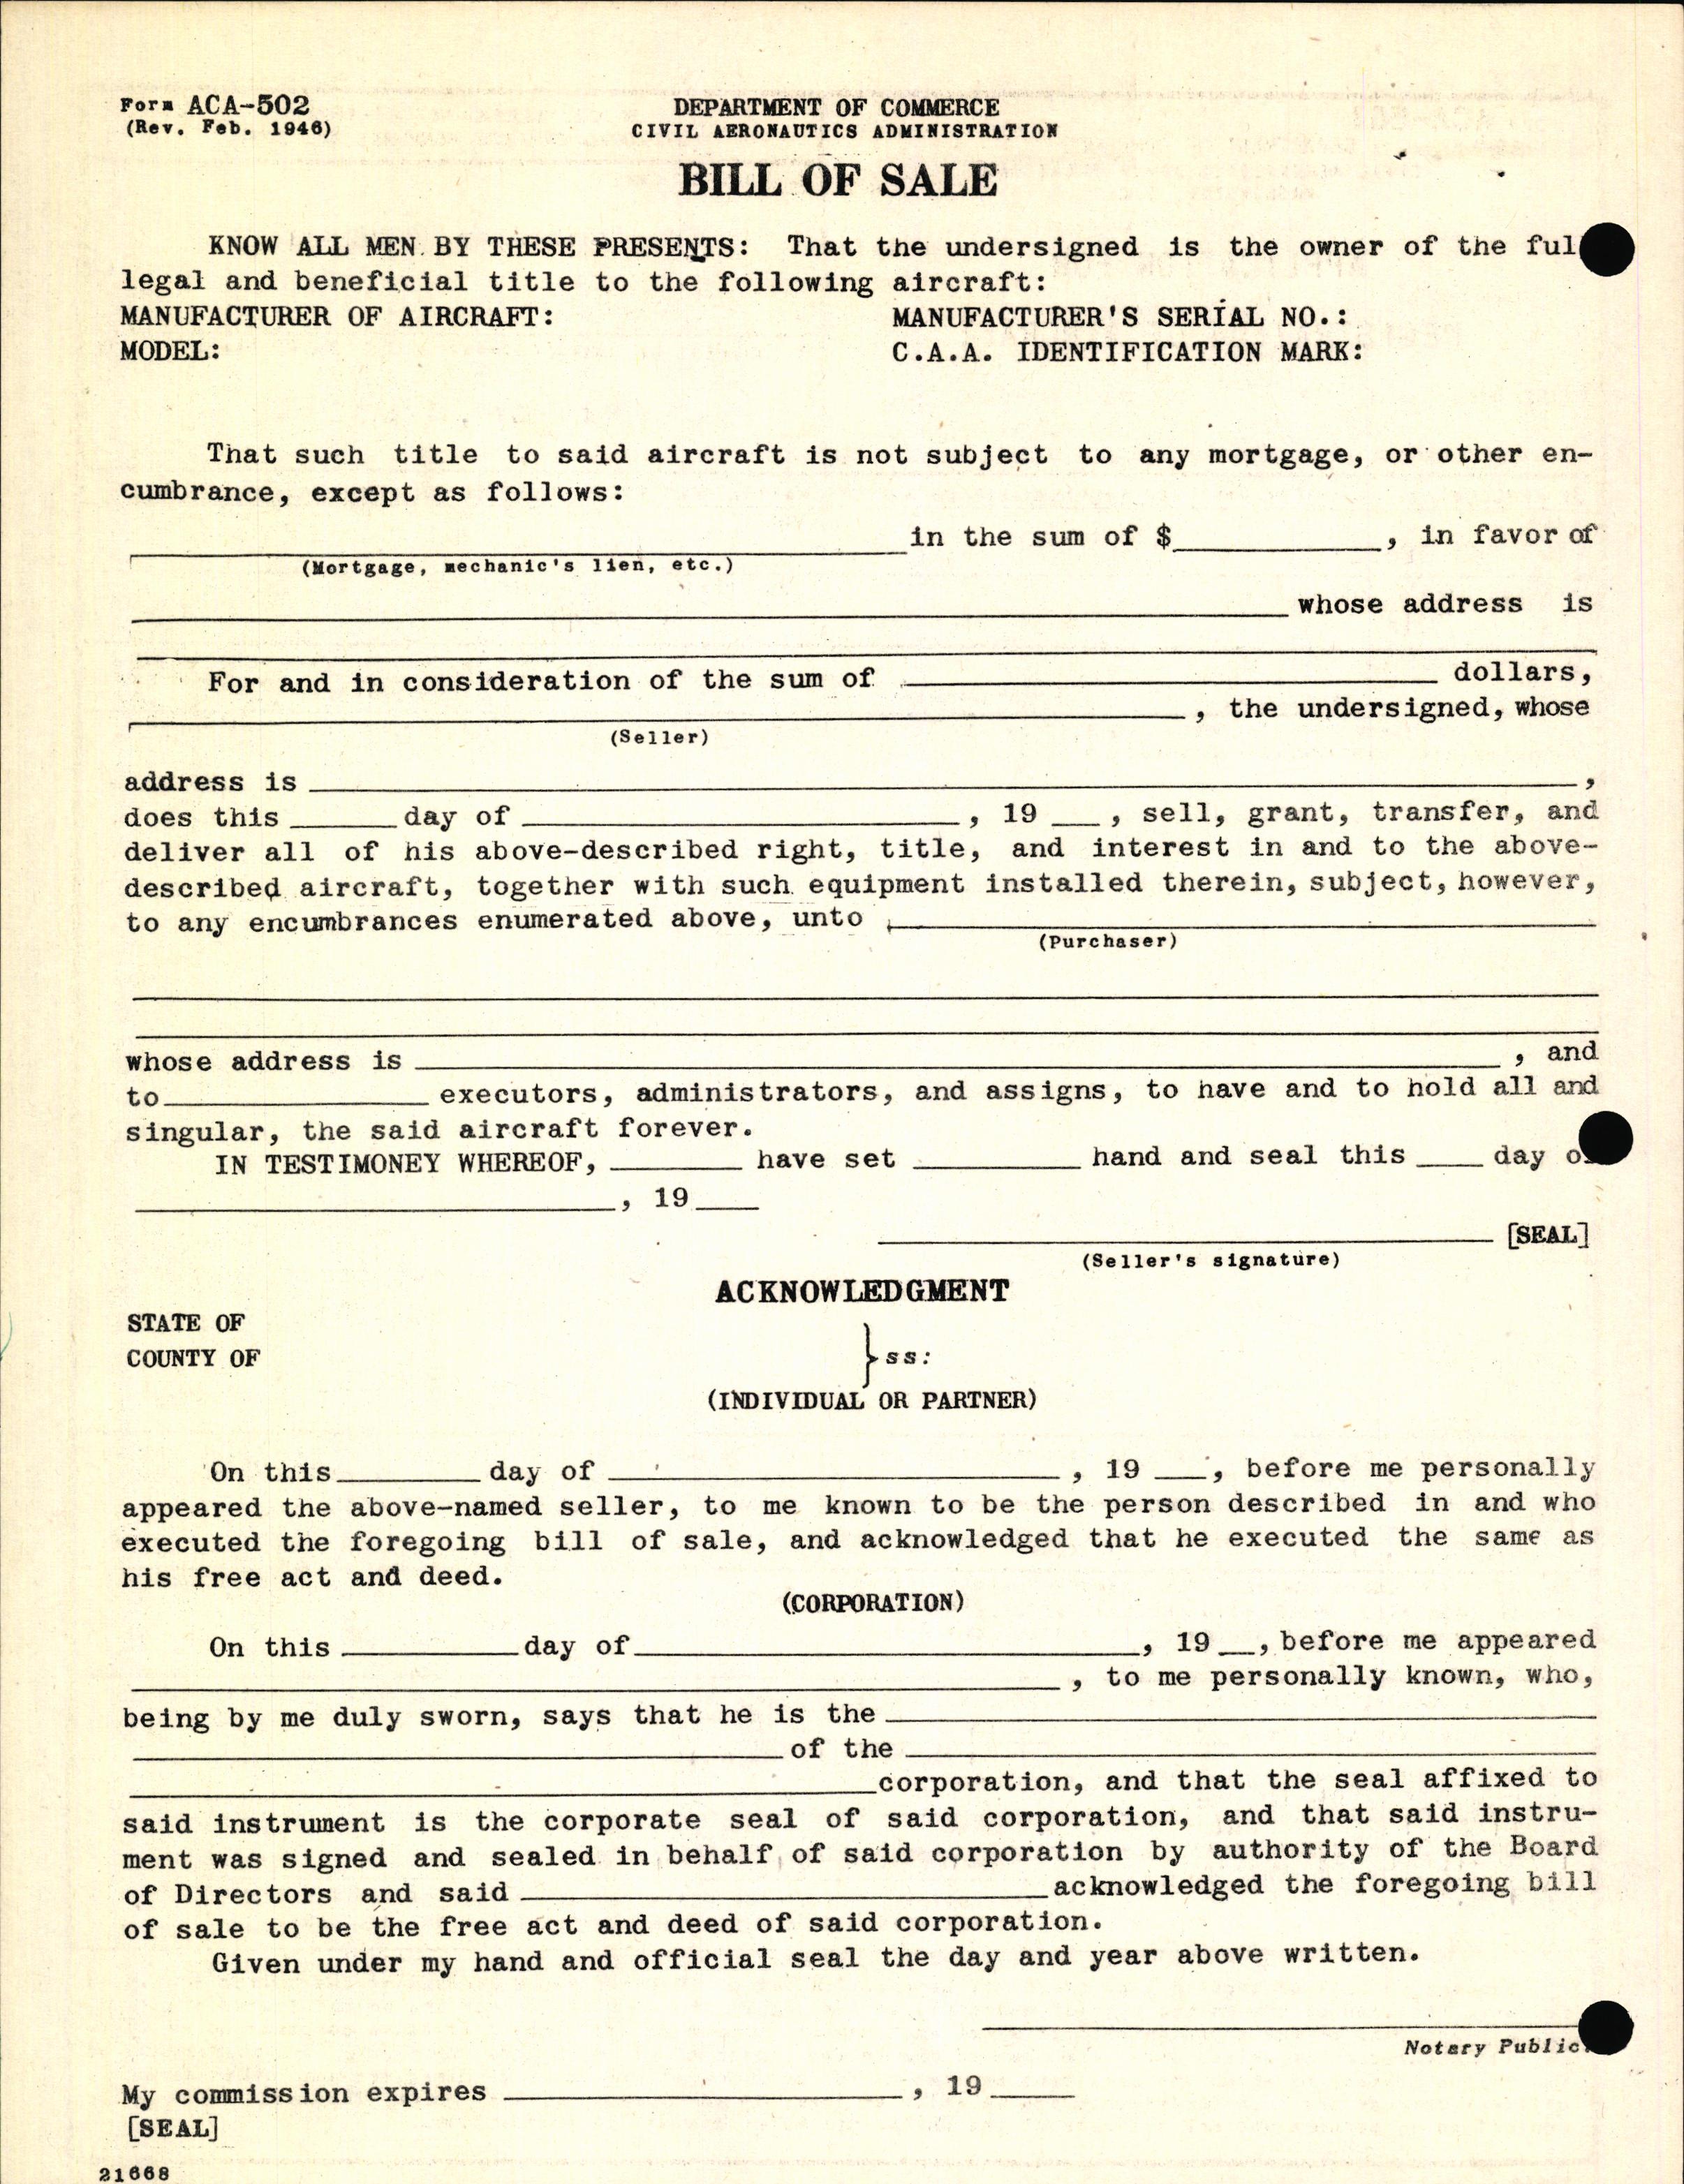 Sample page 2 from AirCorps Library document: Technical Information for Serial Number 2011